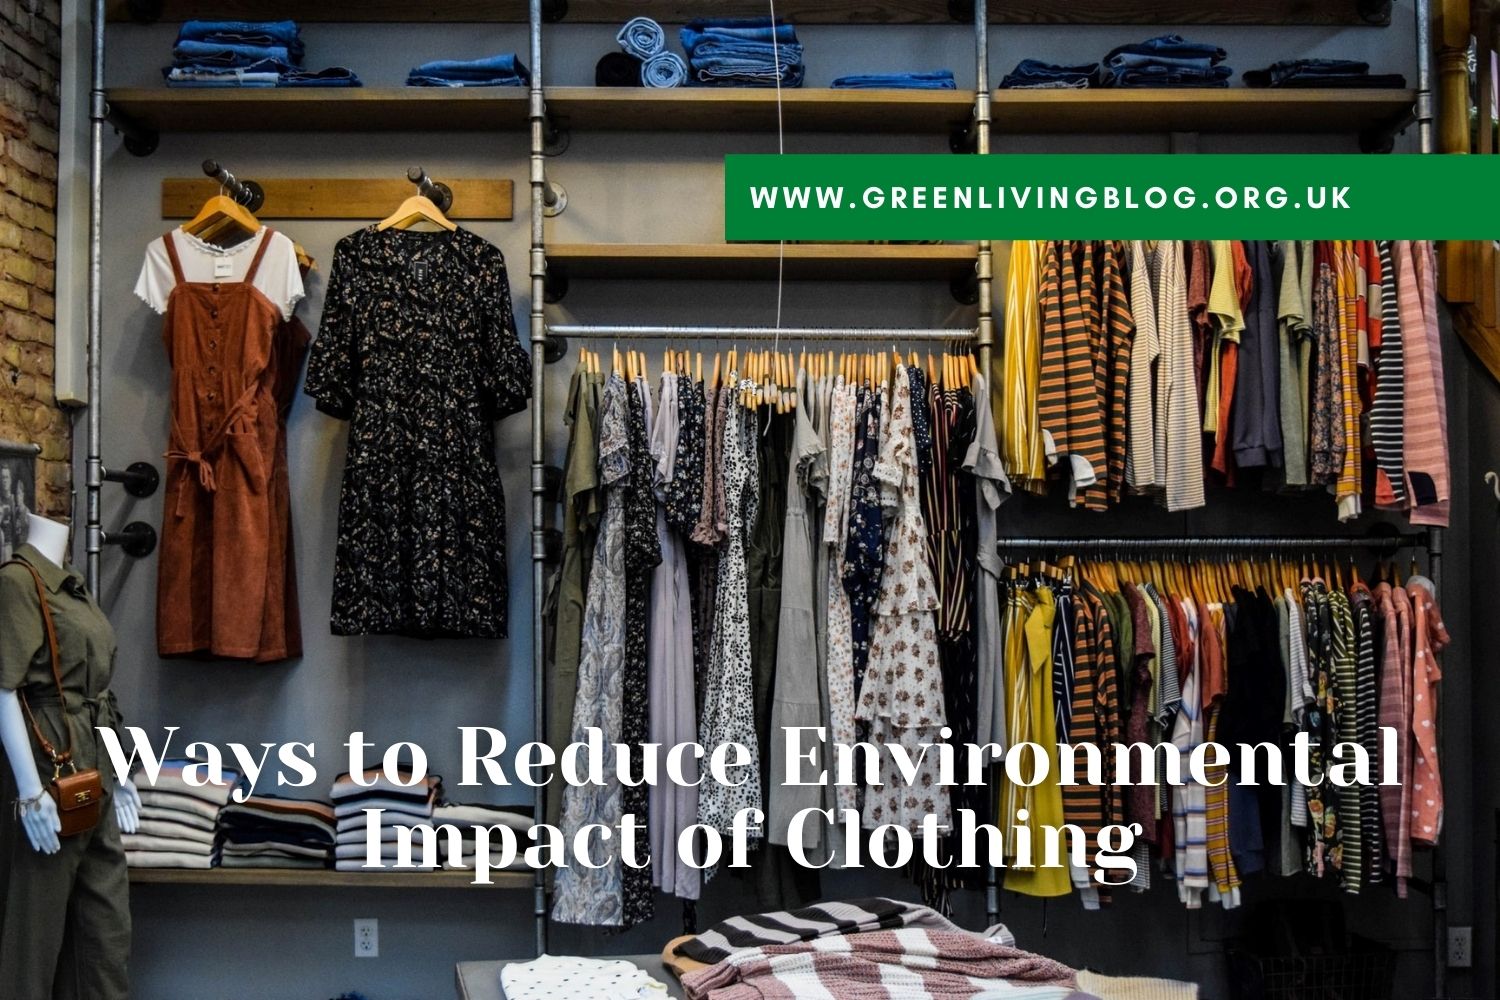 Ways to Reduce the Environmental Impact of Clothing